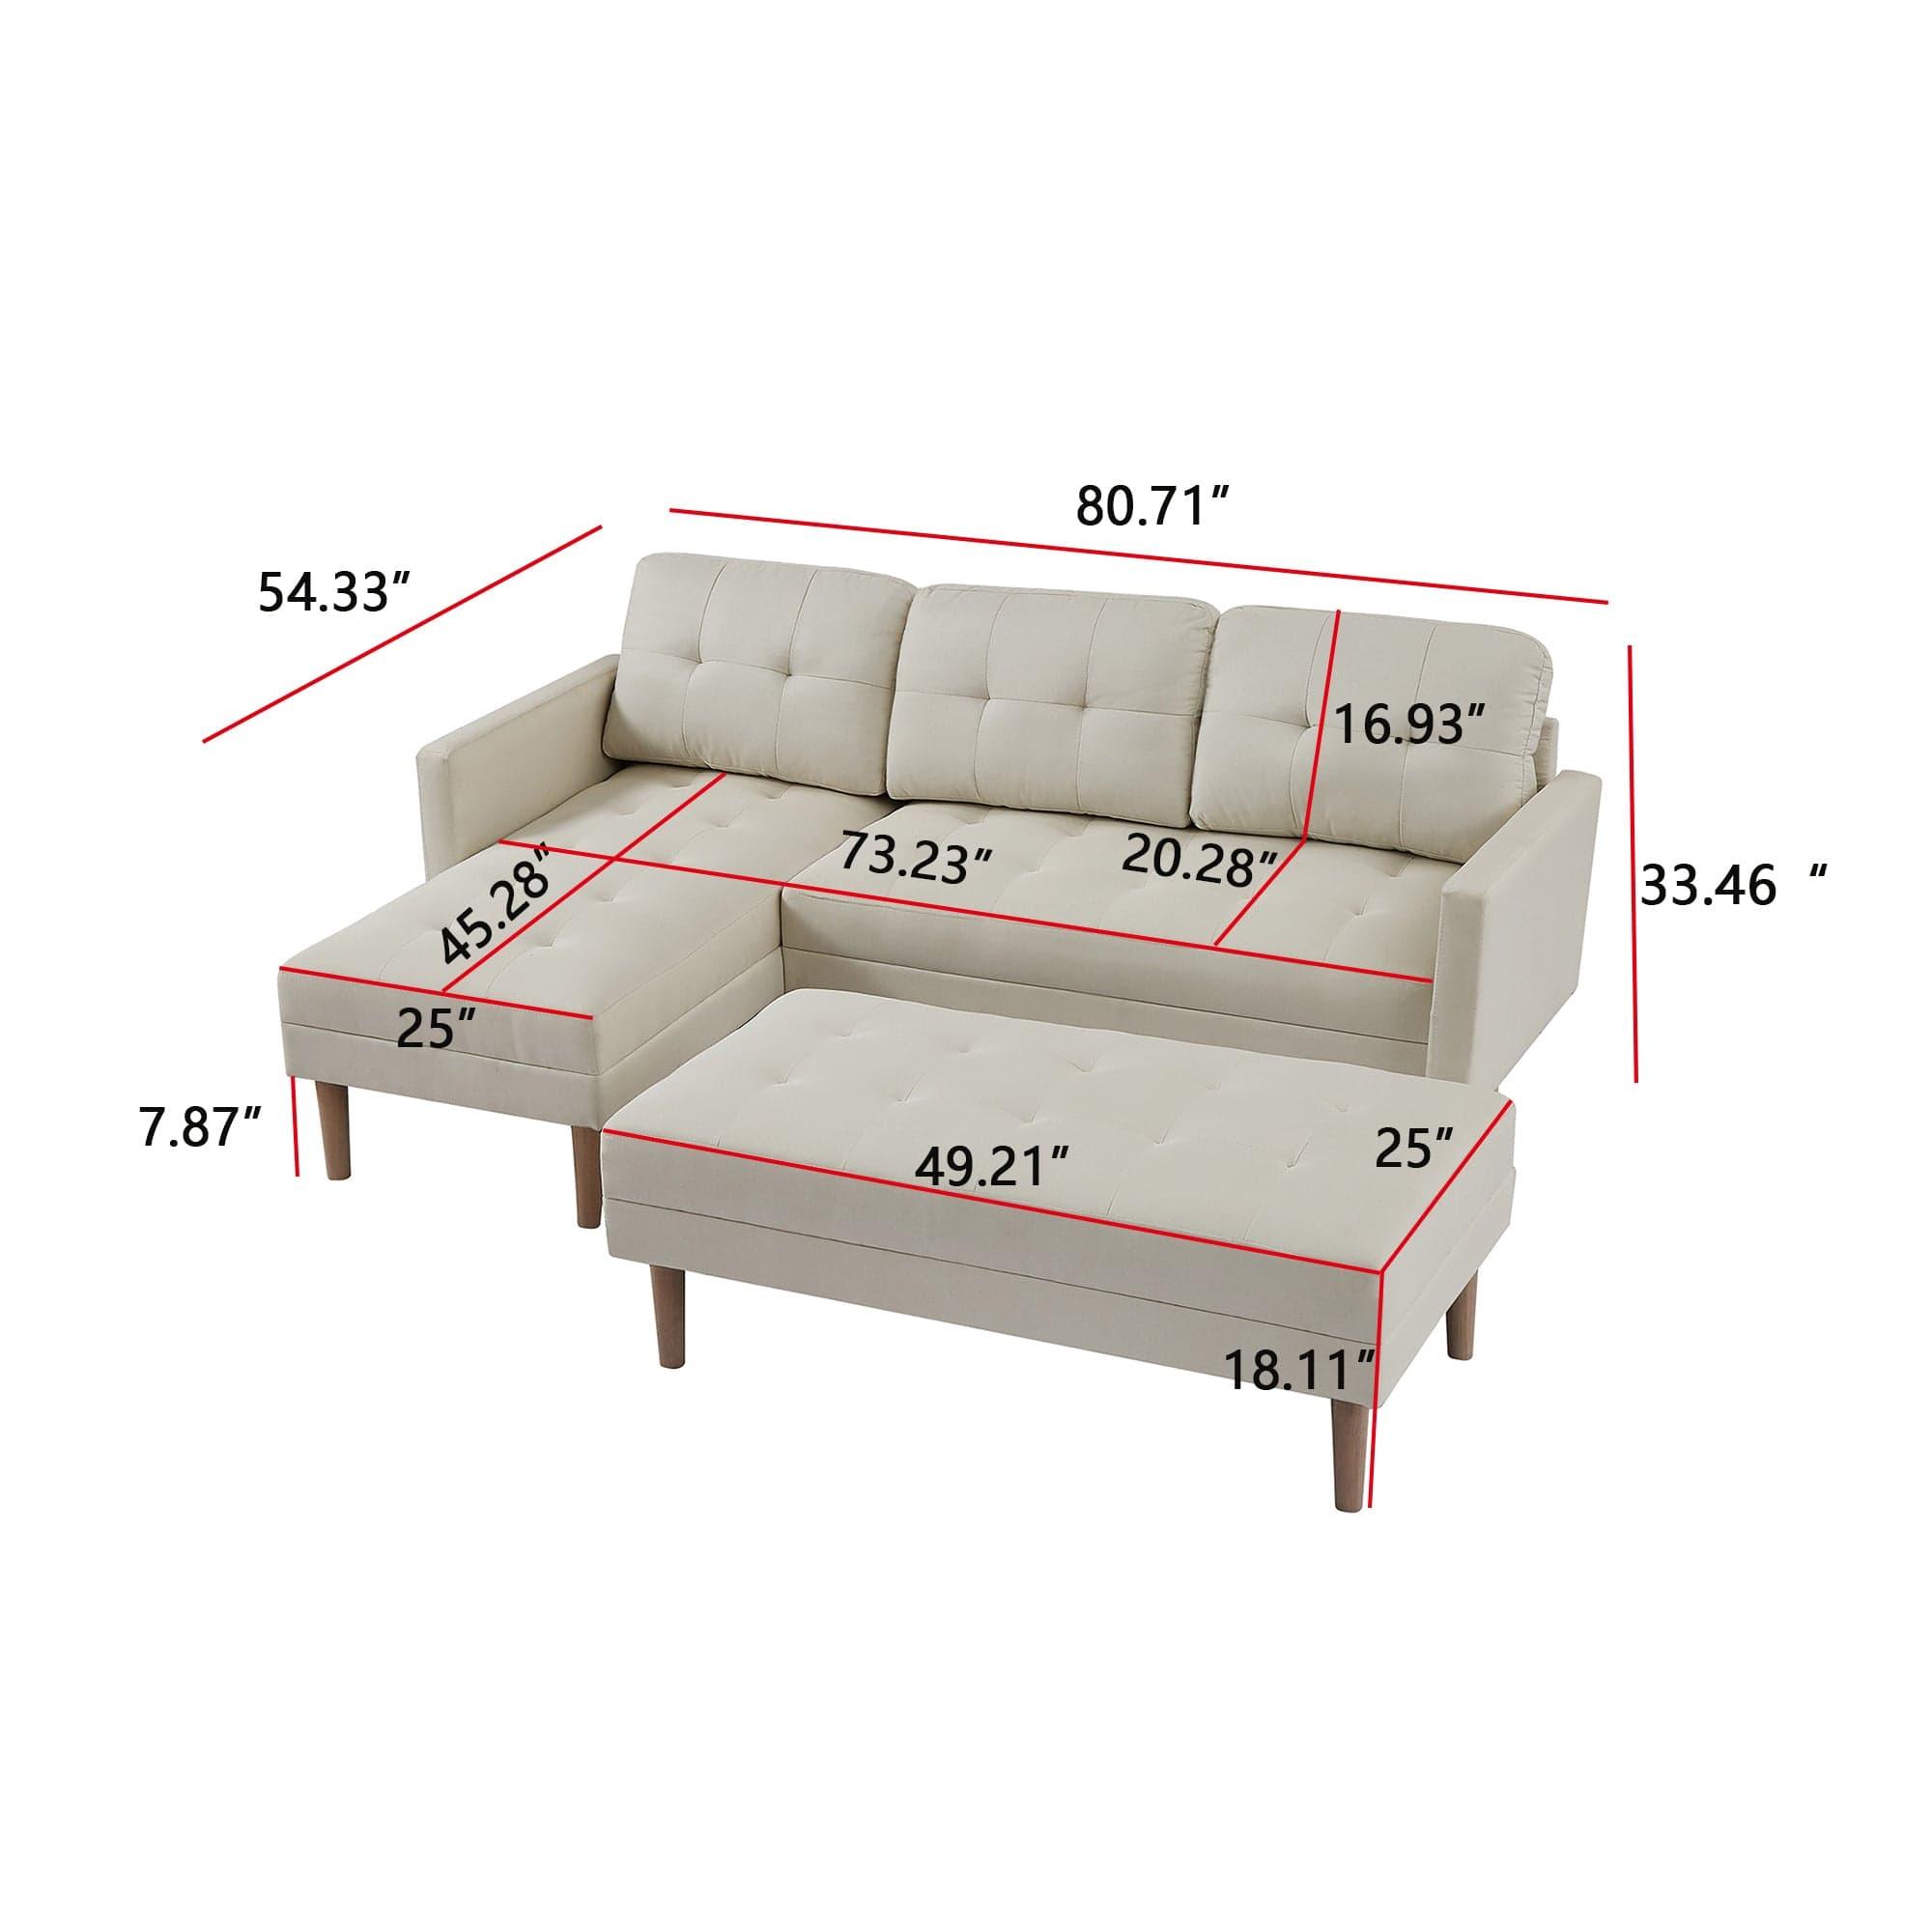 Shop Beige Sectional Sofa Bed , L-shape Sofa Chaise Lounge with Ottoman Bench Mademoiselle Home Decor